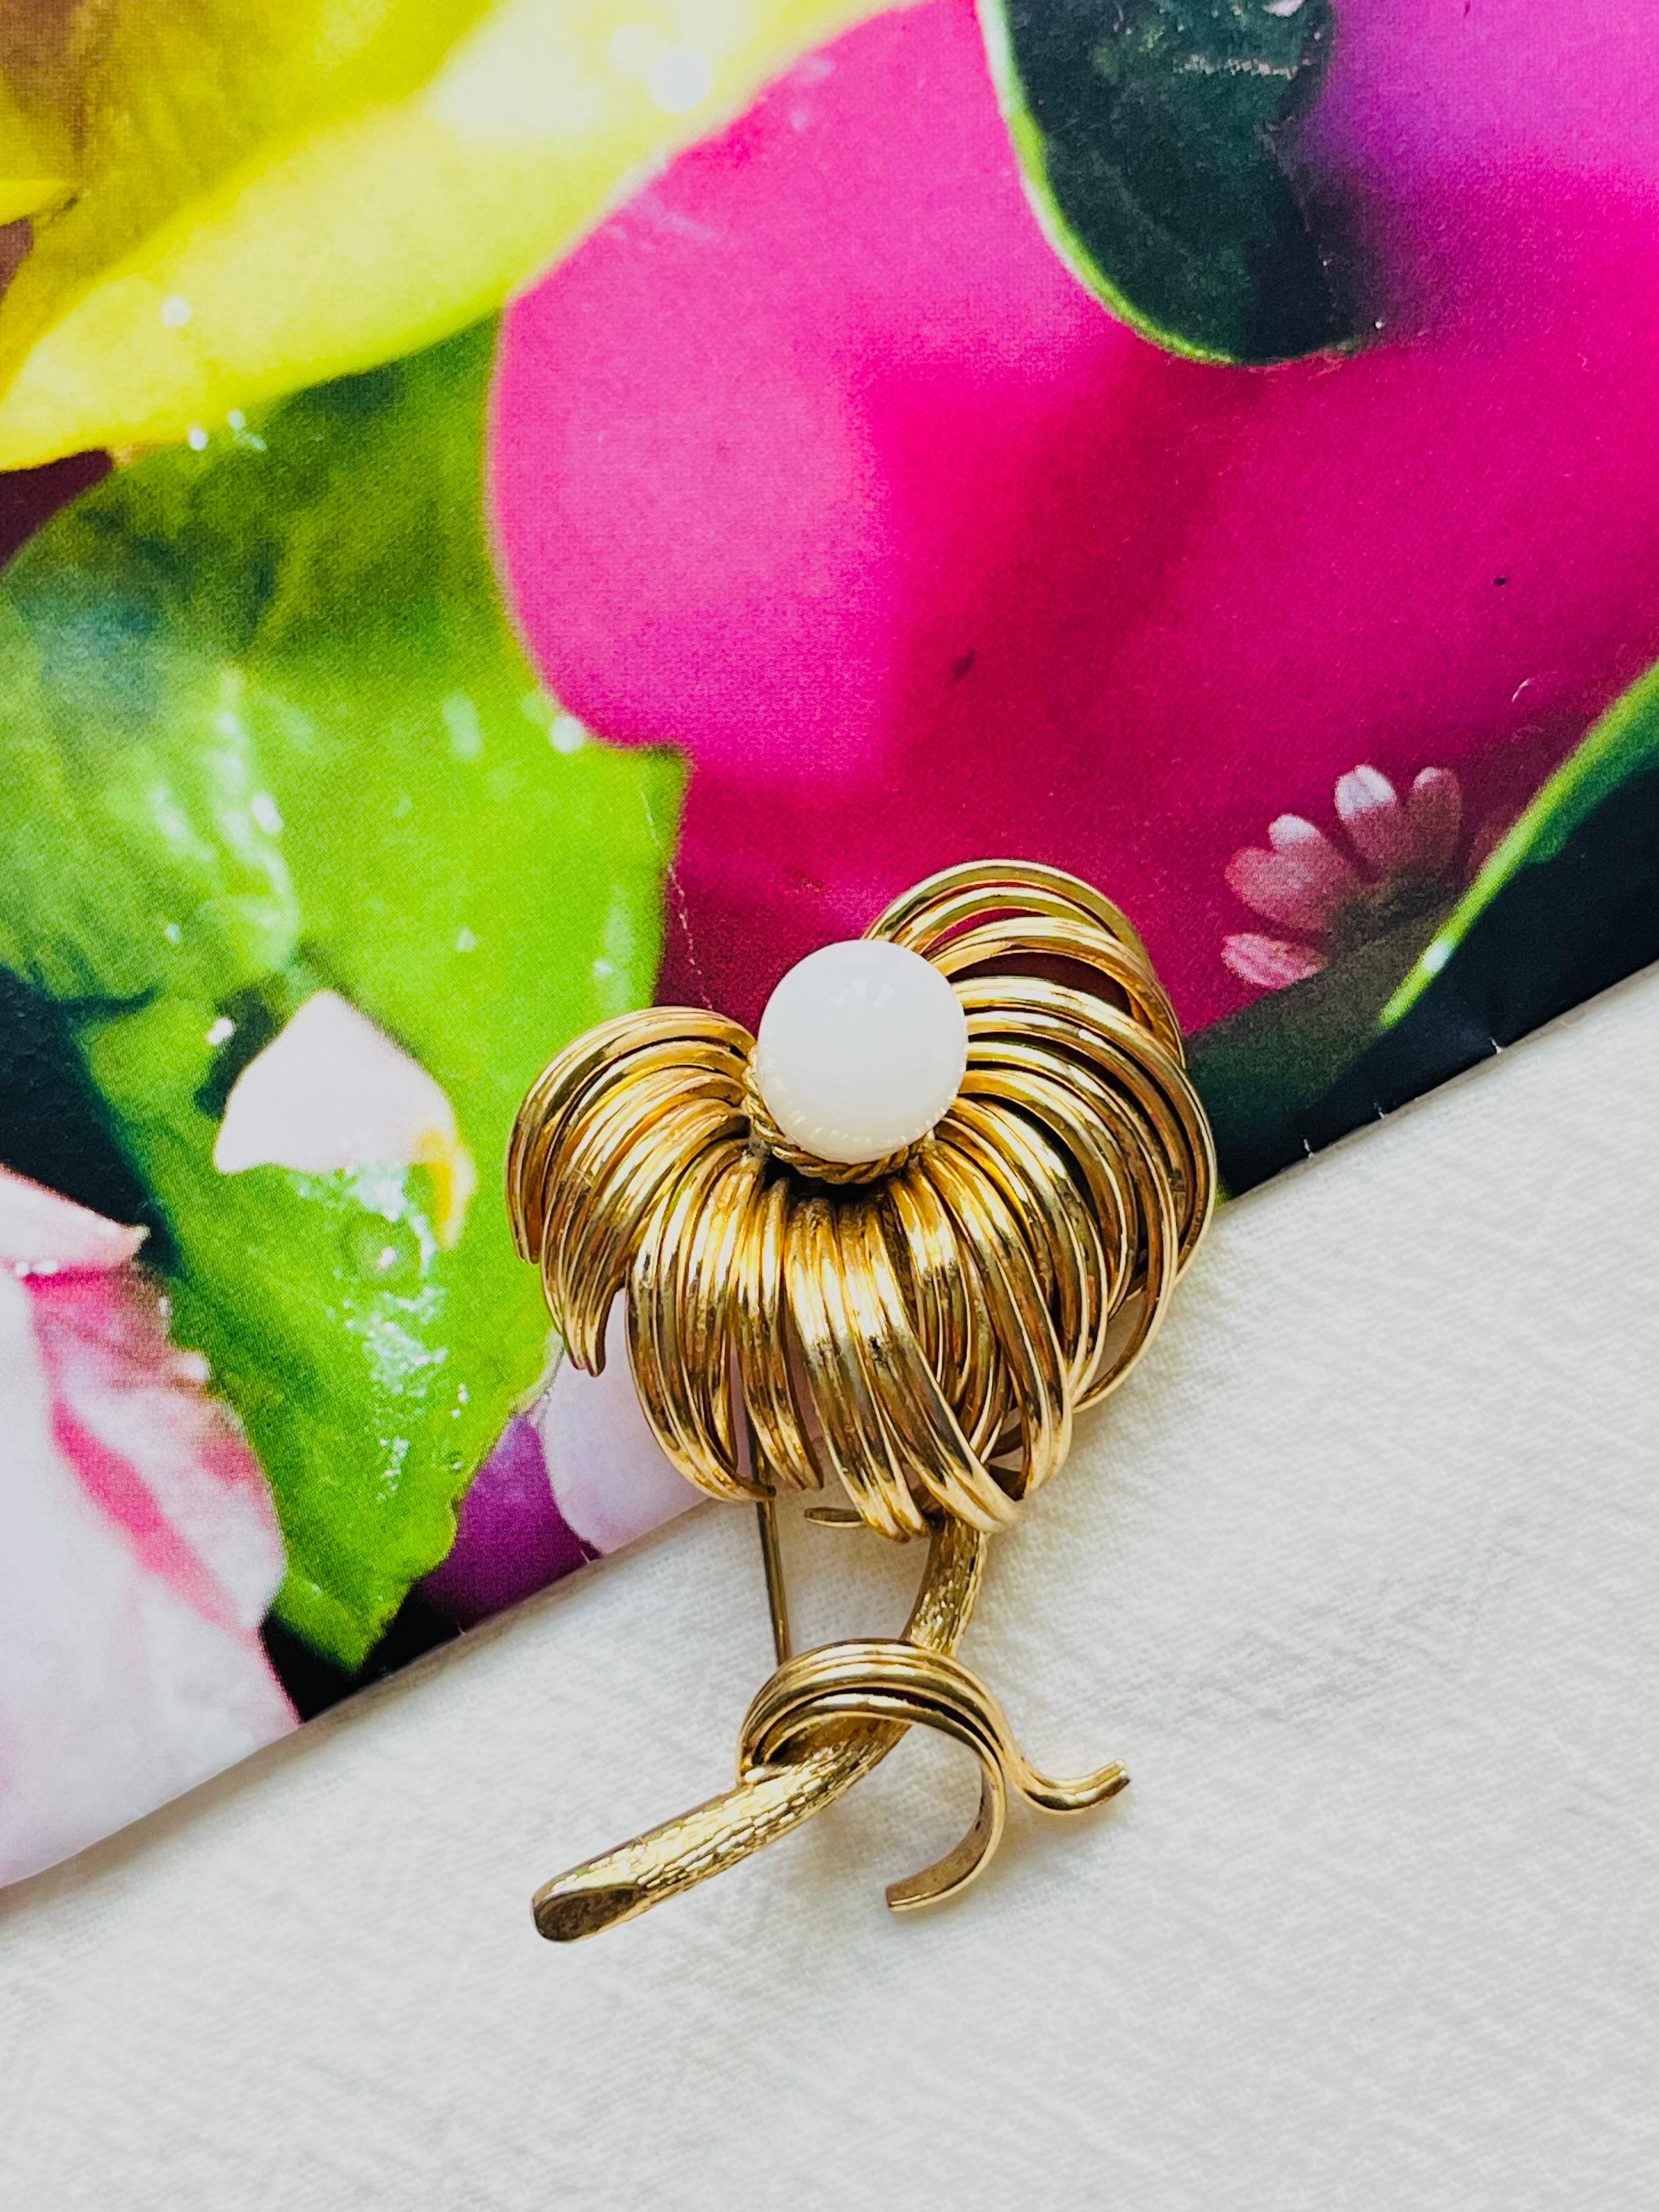 Christian Dior GROSSE 1960 Vintage Vivid Flower White Curled Leaf Brooch, Gold Tone

Very good condition. Some scratches or colour loss, barely noticeable. Some dark spots at pin. 

Safety-catch pin closure, signed GROSSE 1960 on the back. 100%